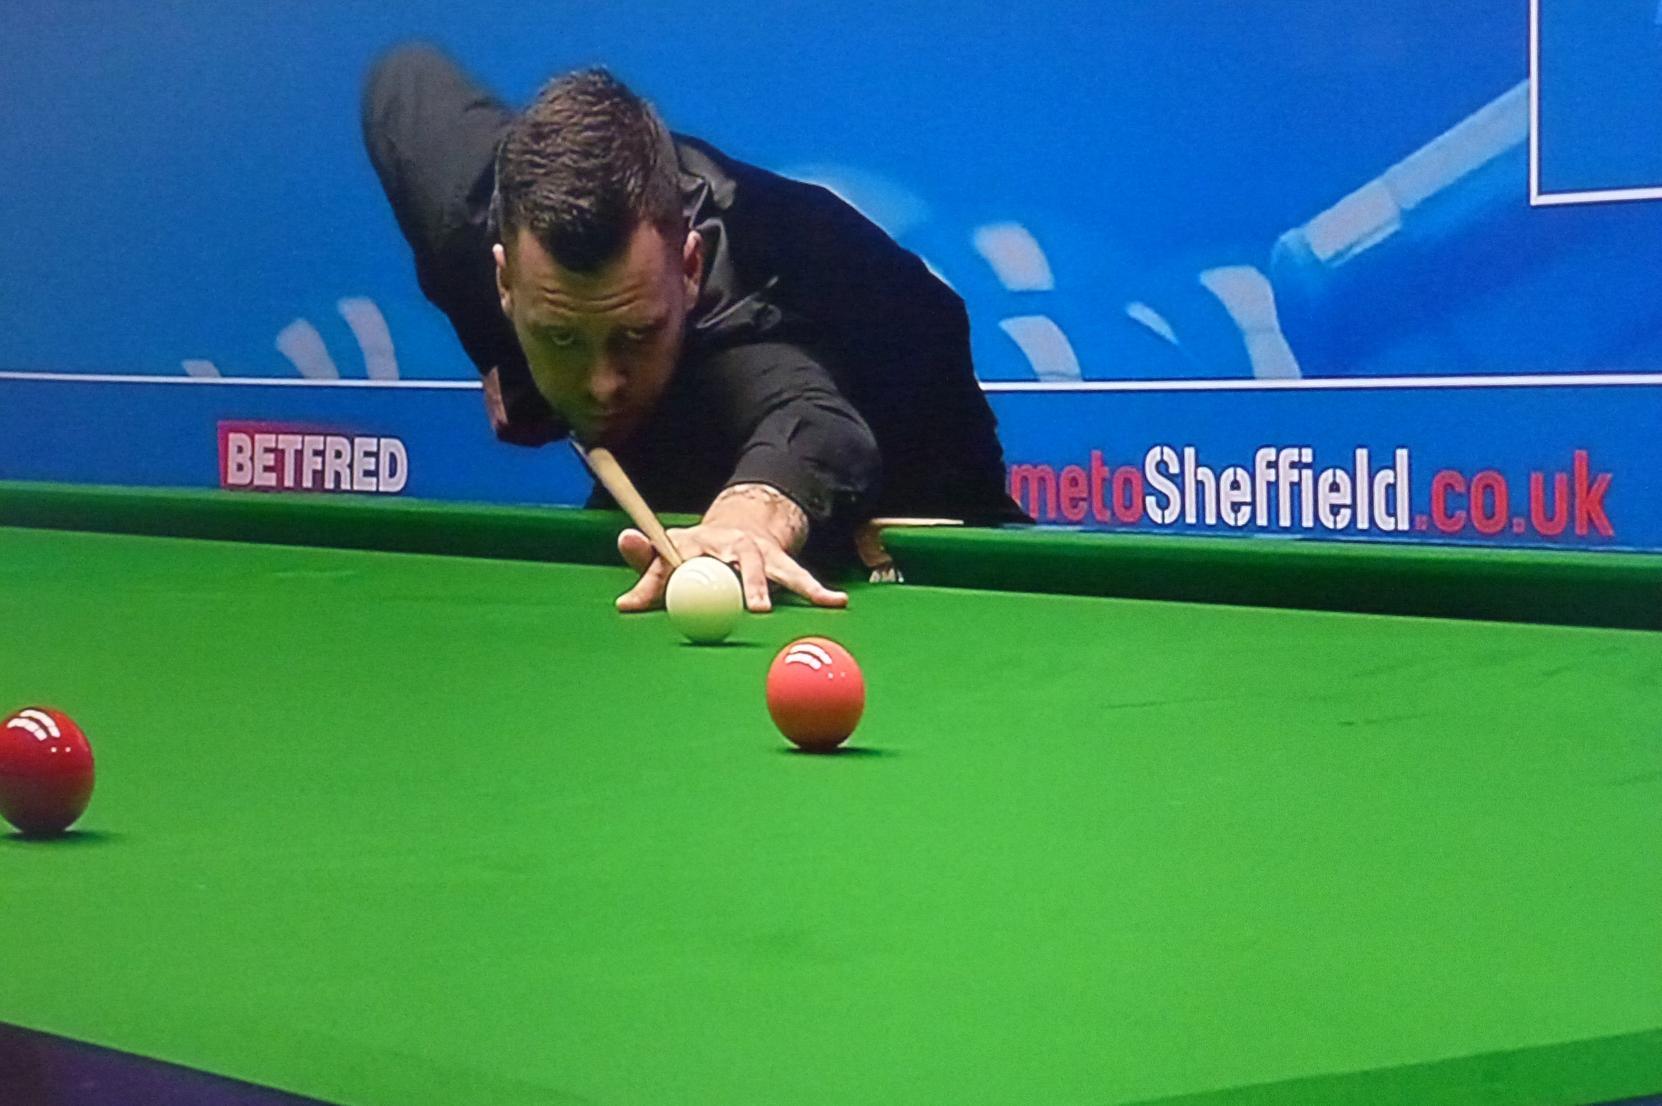 Sussex snooker ace scores 178 points in single frame